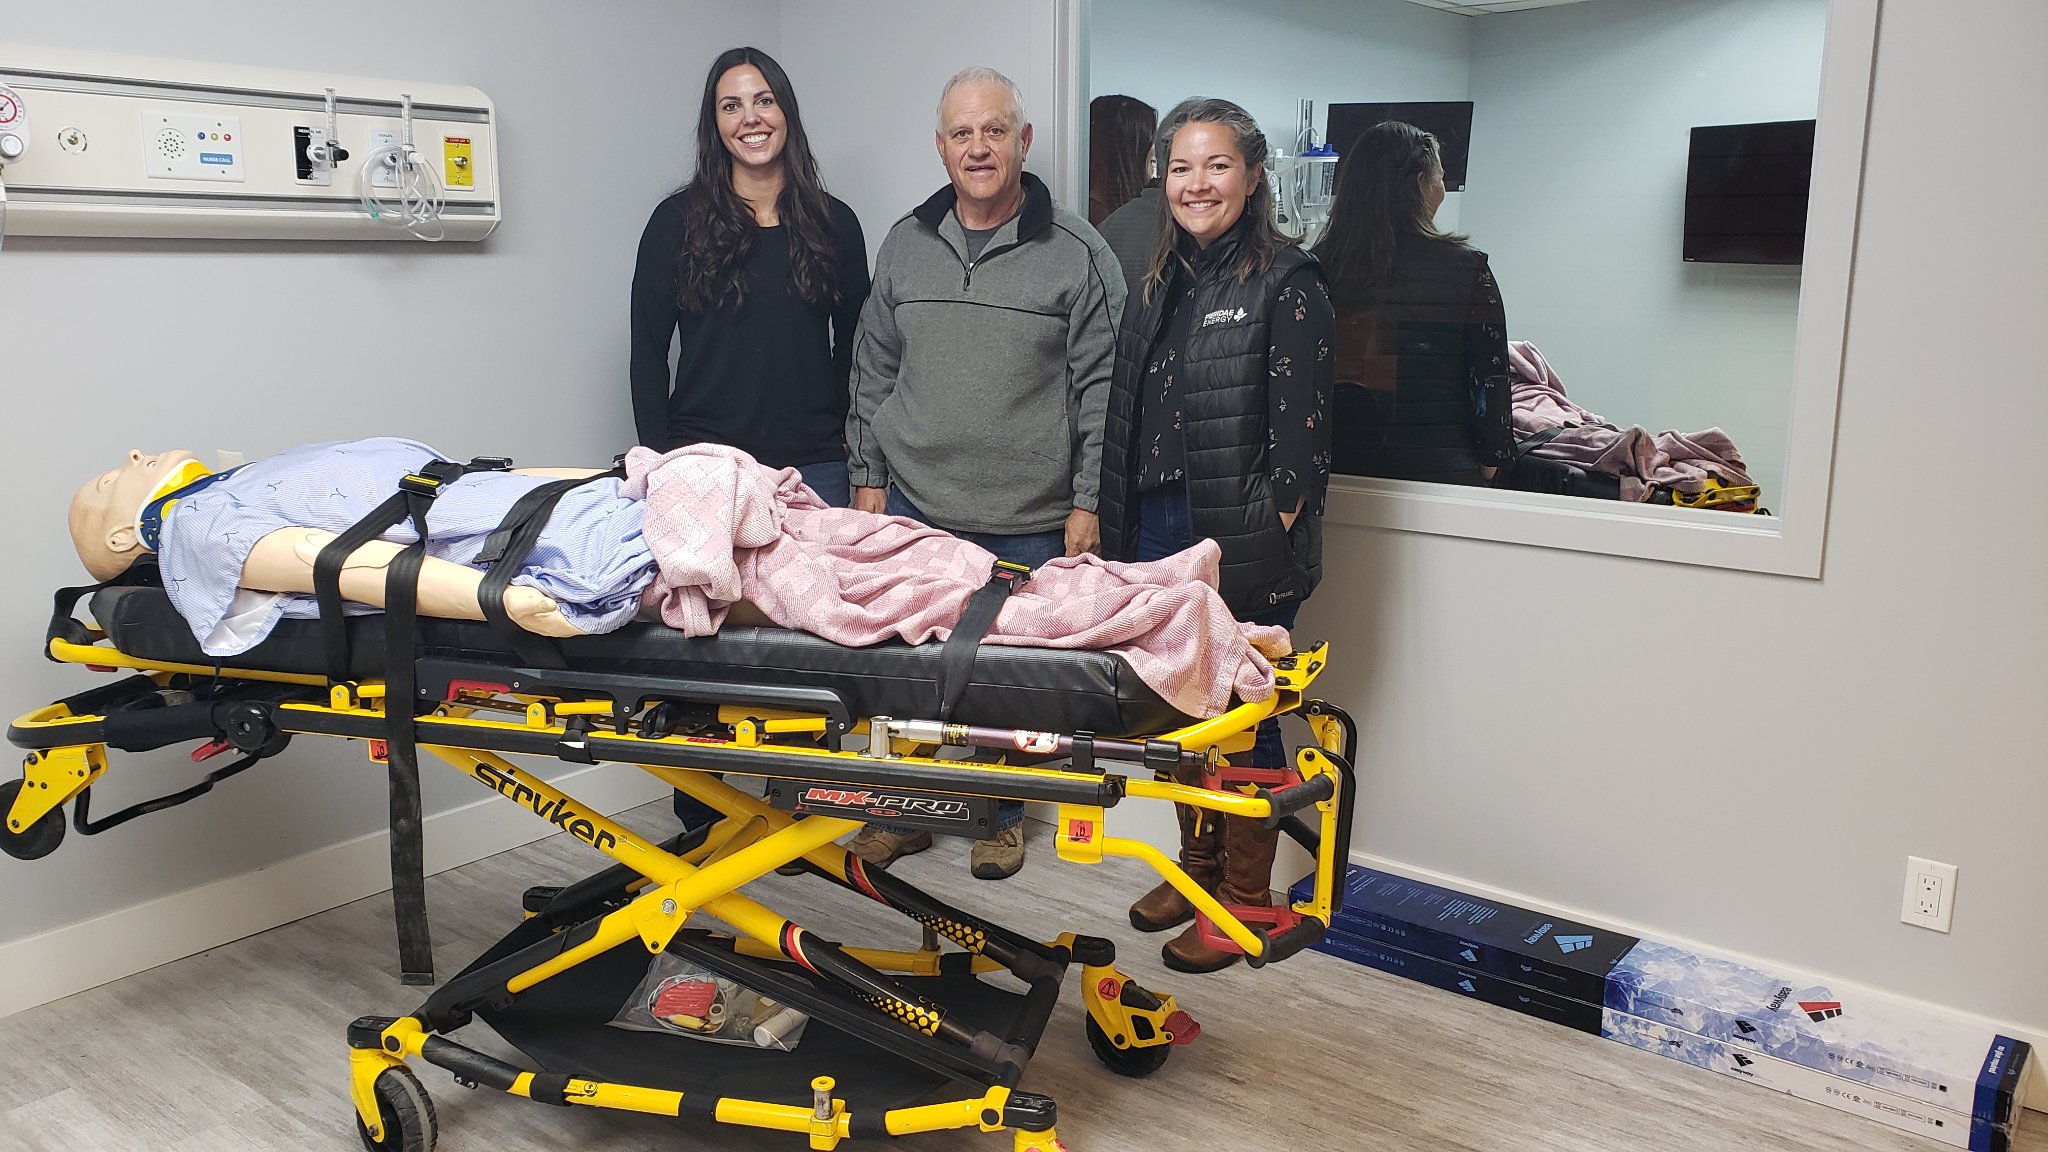 Environmental Coordinator Karlee Overguard, Community Liaison Officer Thalia Aspeslet, join Sundre Hospital Futures Chair Gerald Ingeveld at the lab